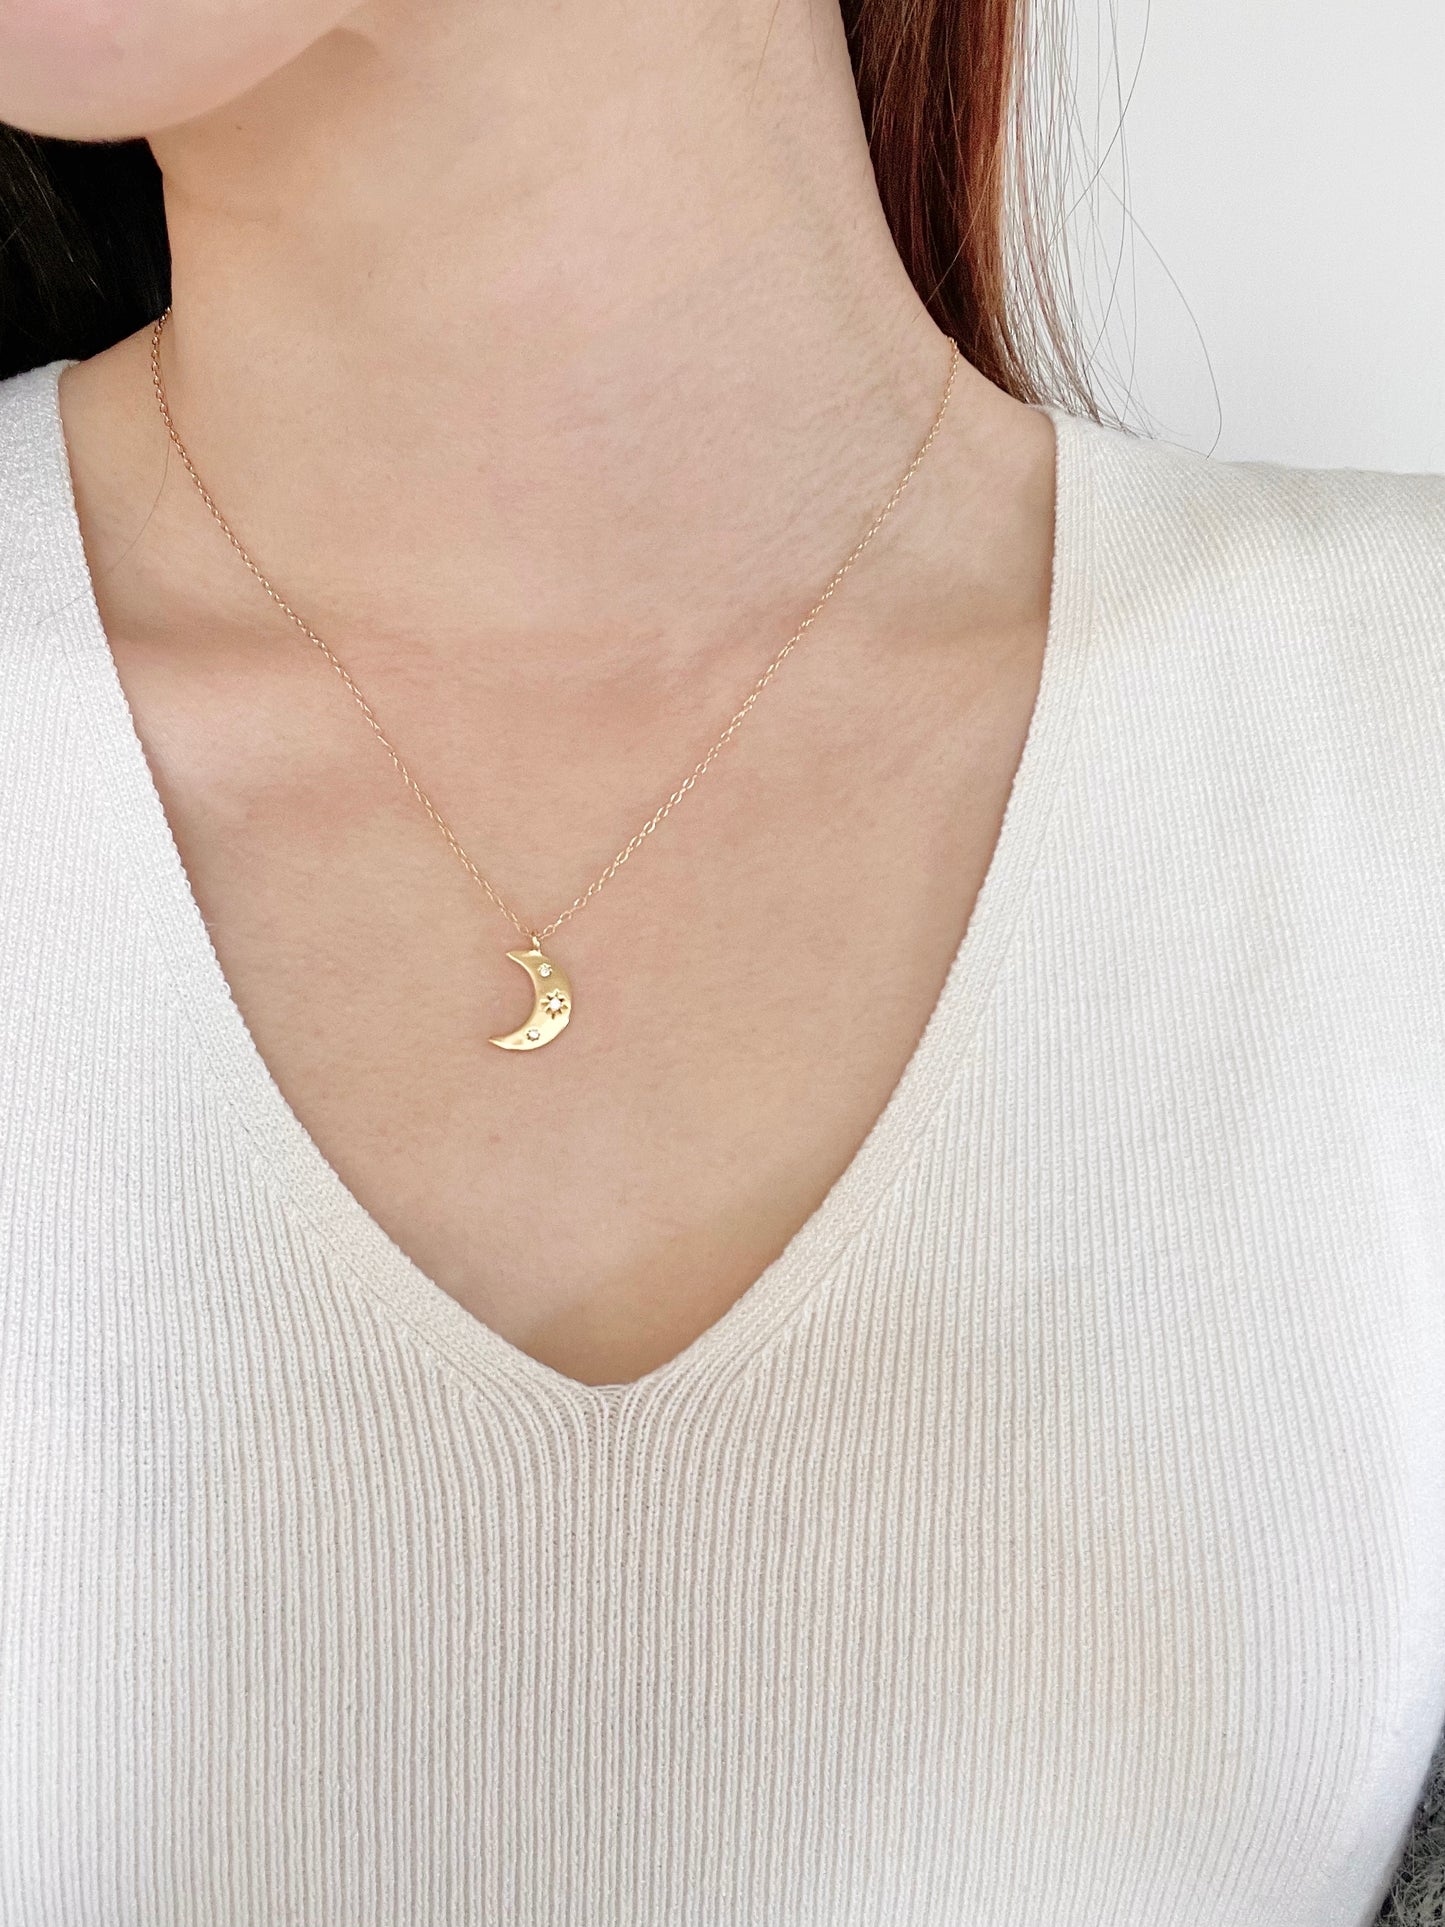 Dainty Moon Charm Necklace